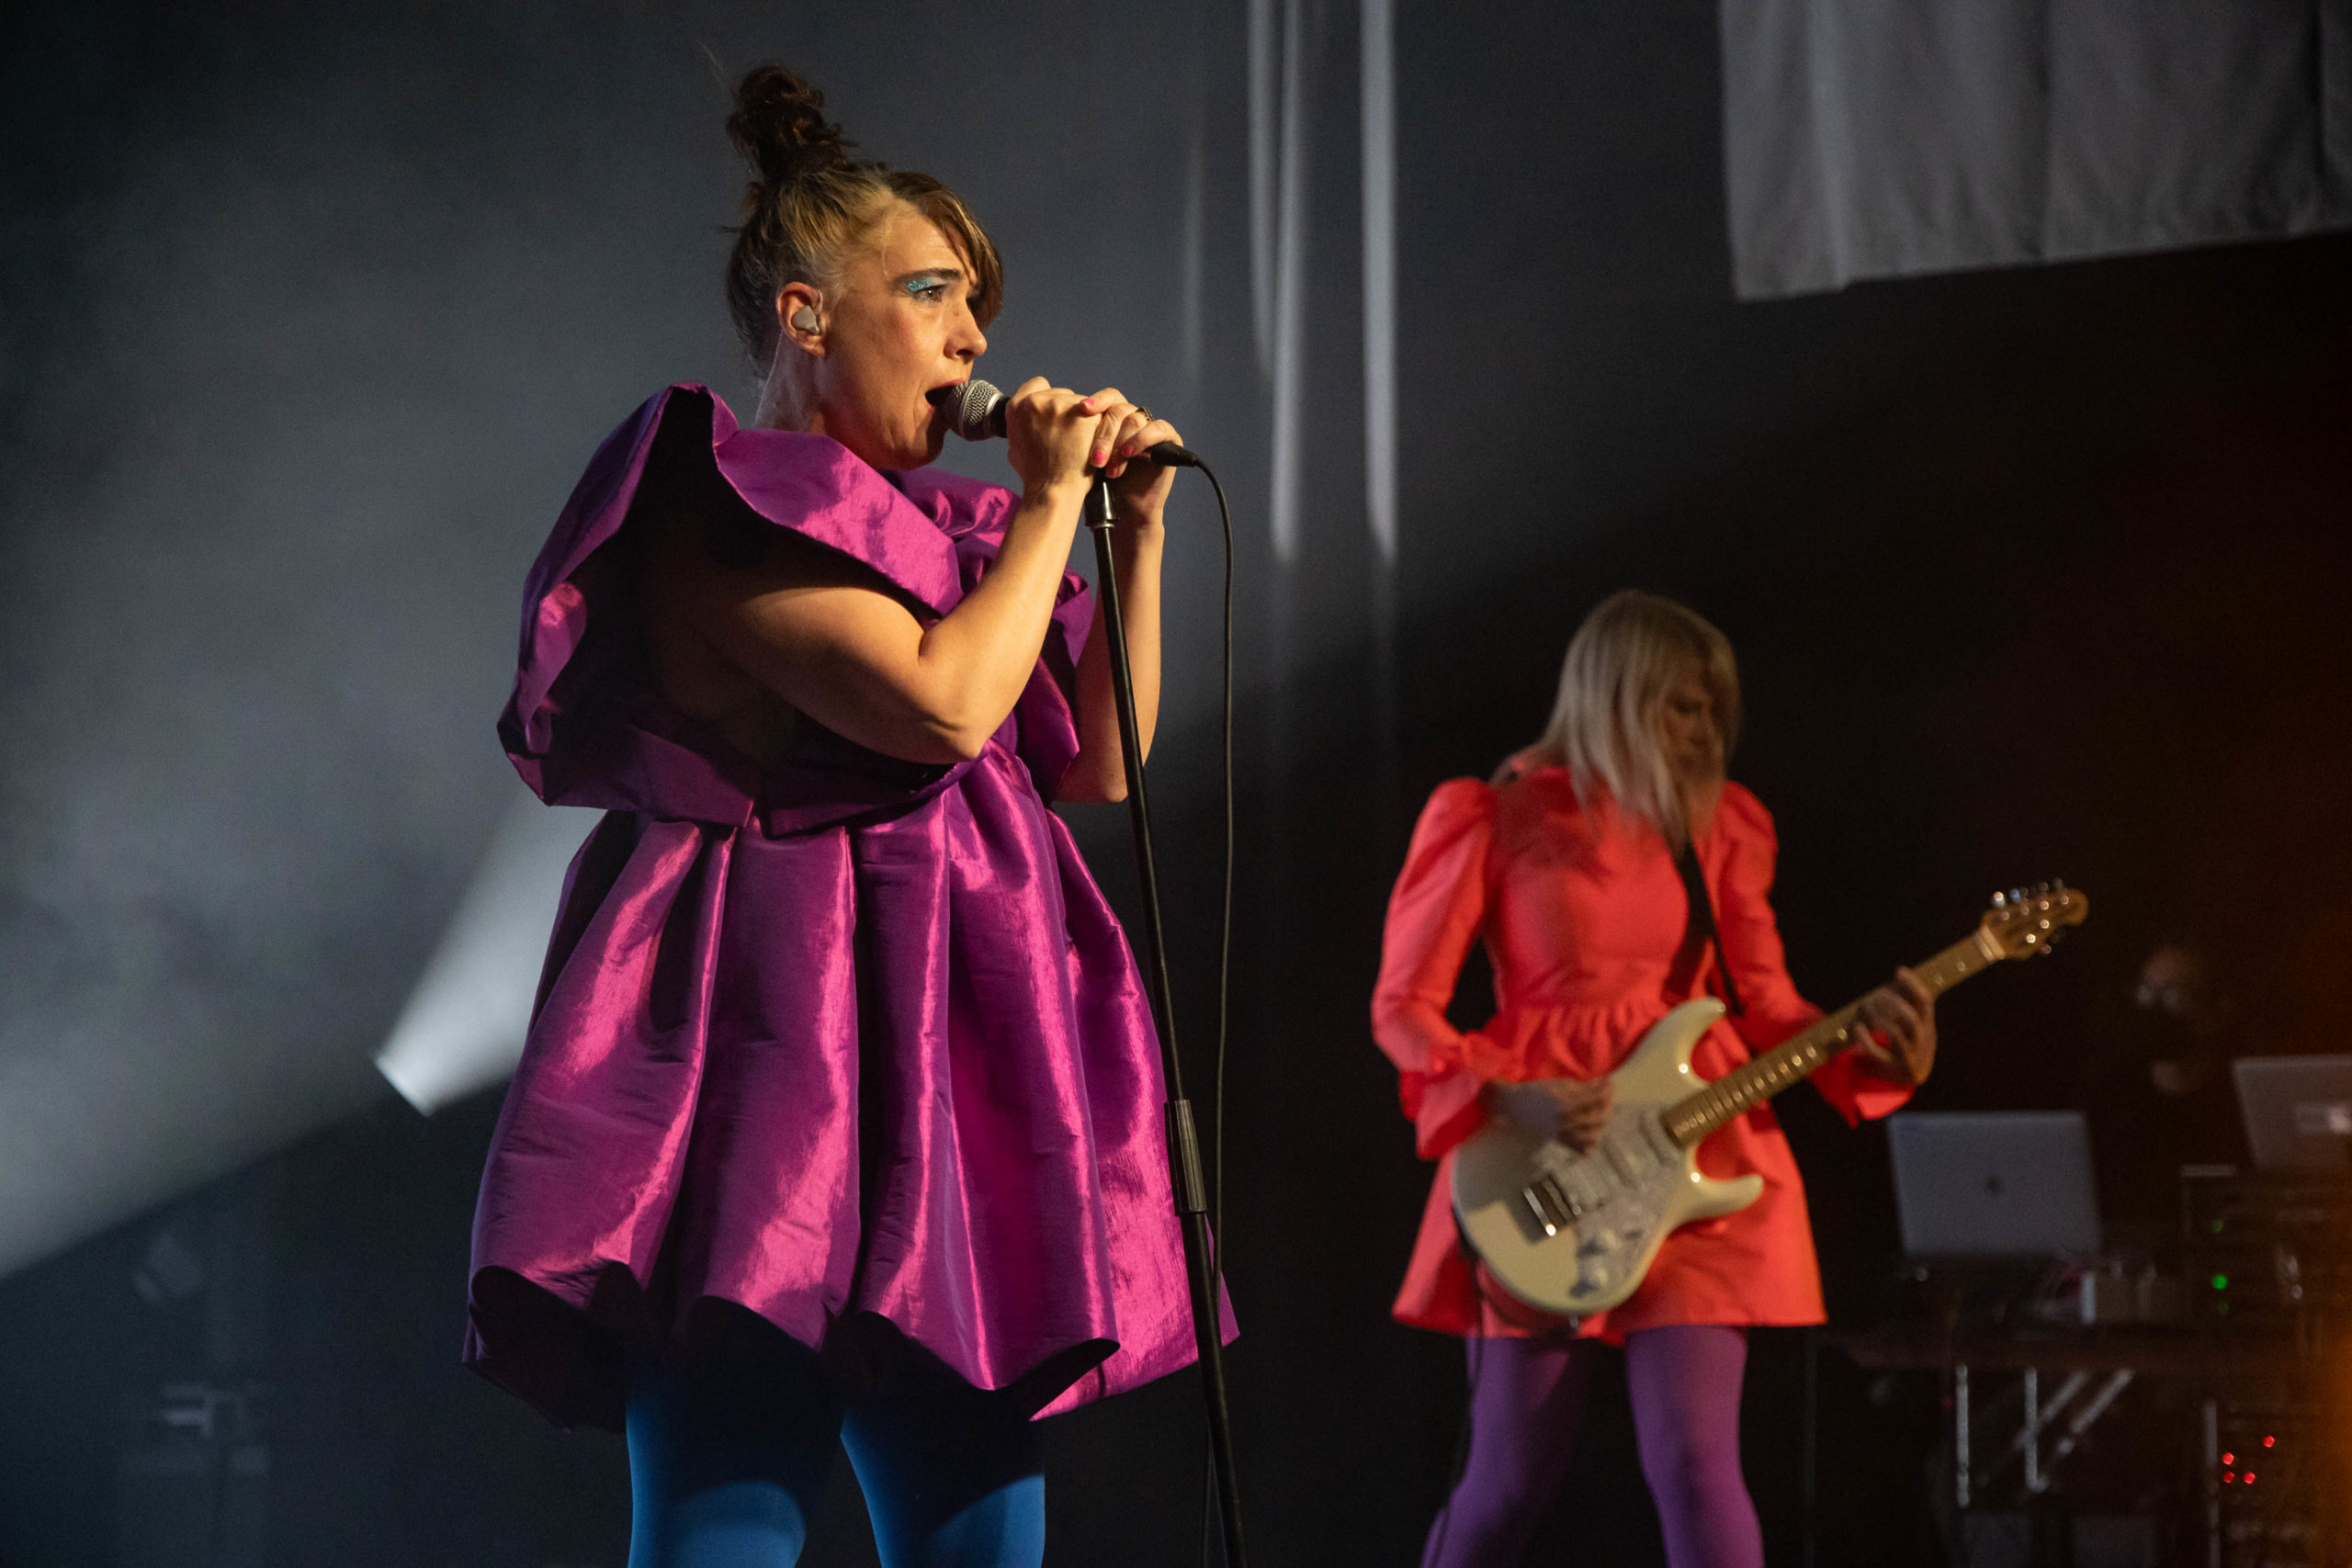 The front woman for Le Tigre is on stage at the Commodore in a shiny purple dress, with another member of the band in an orange dress behind her